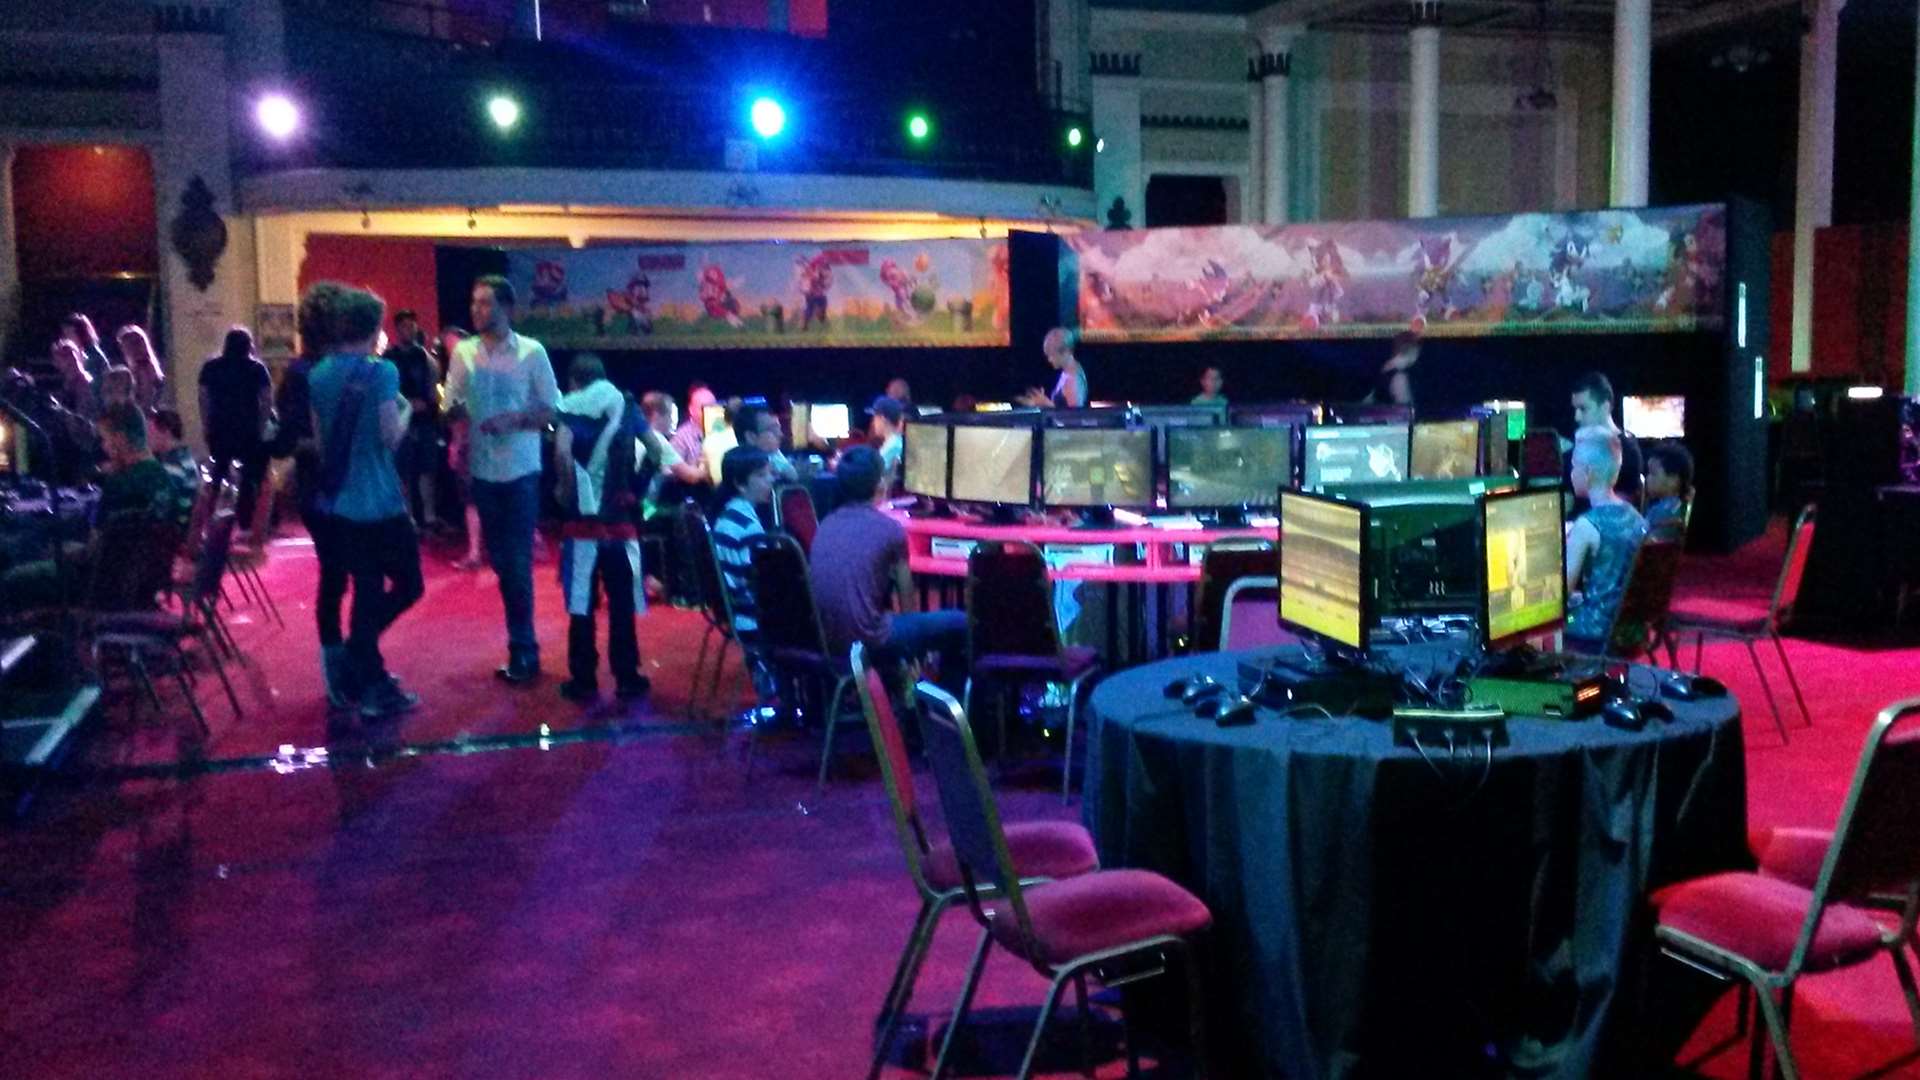 The gaming room in the main hall of the Winter Gardens is expected to fill up this weekend.